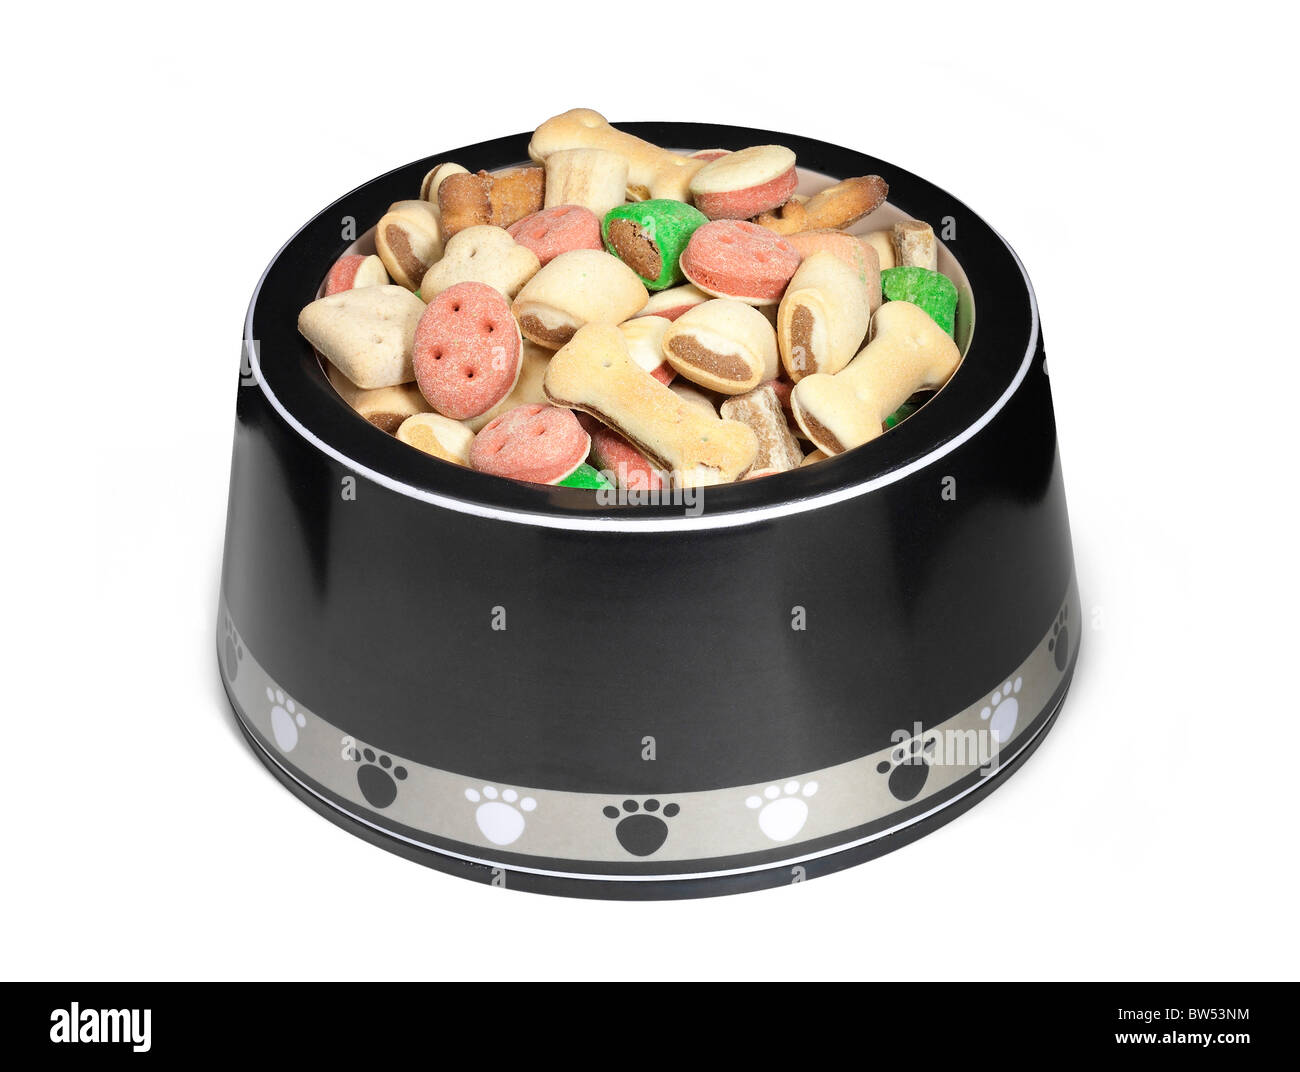 Large dog bowl full of dog biscuit food Stock Photo